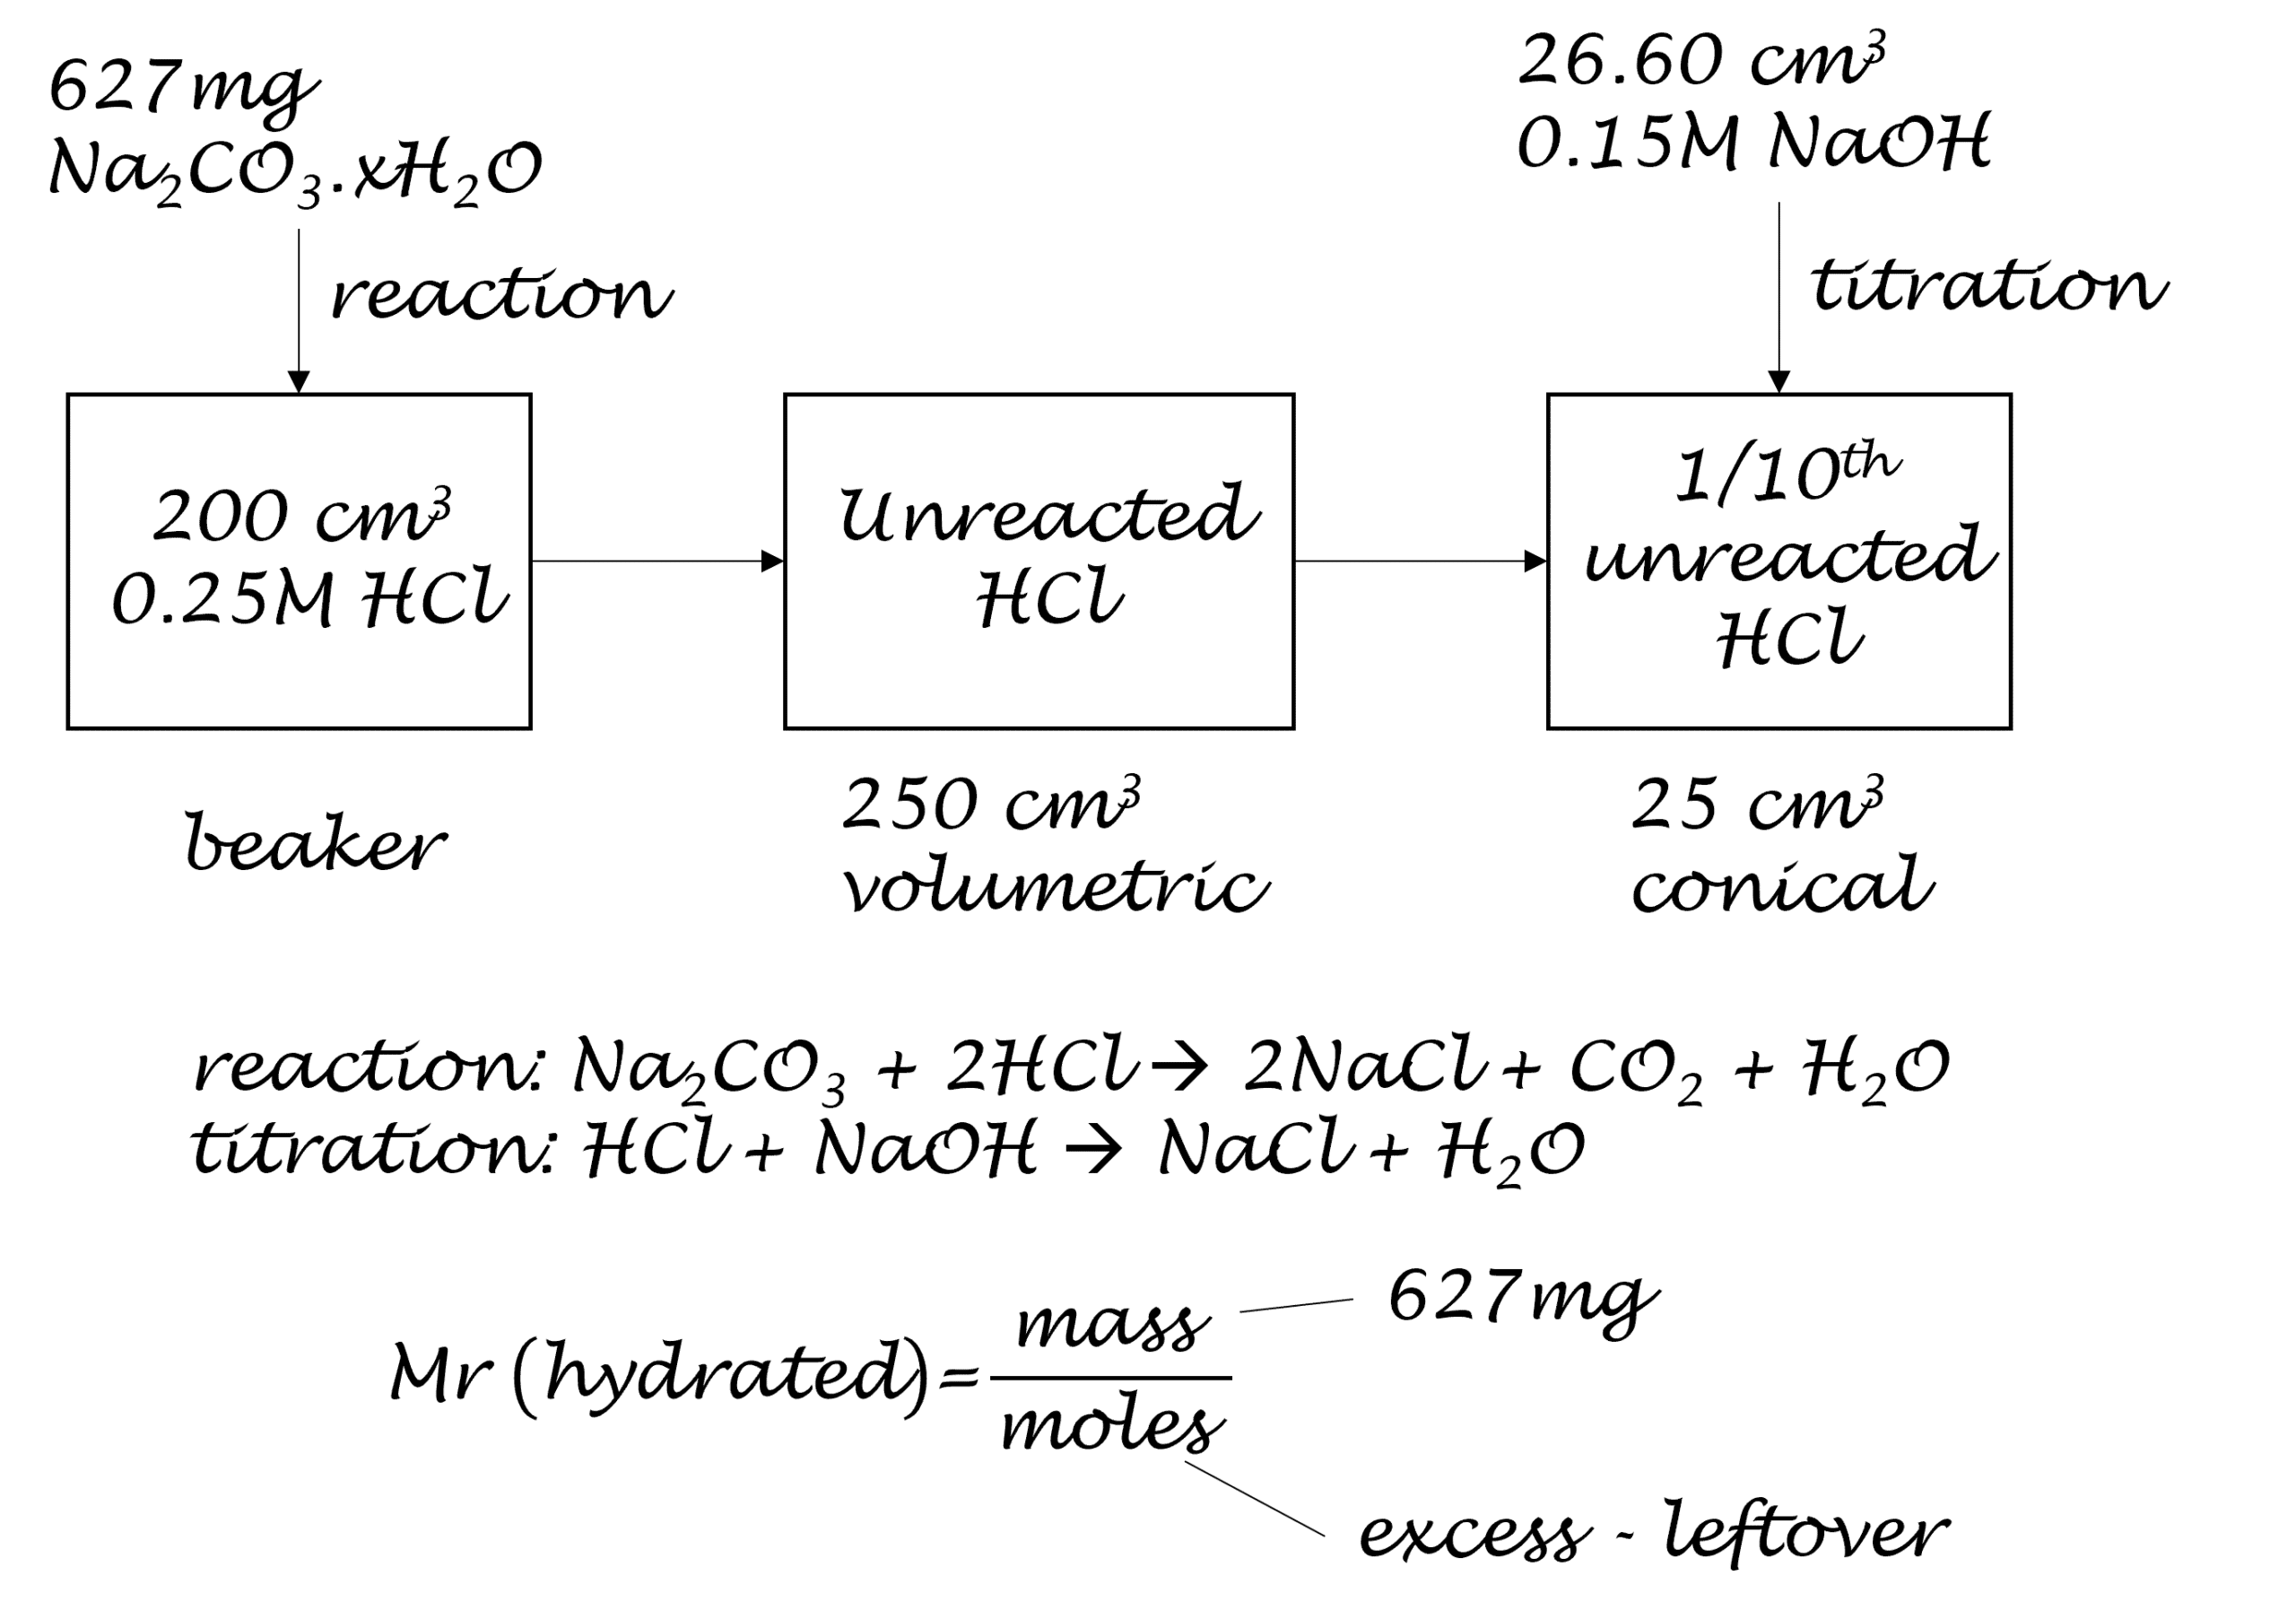 A-level Chemistry/OCR (Salters)/Designer Polymers - Wikibooks, open books  for an open world